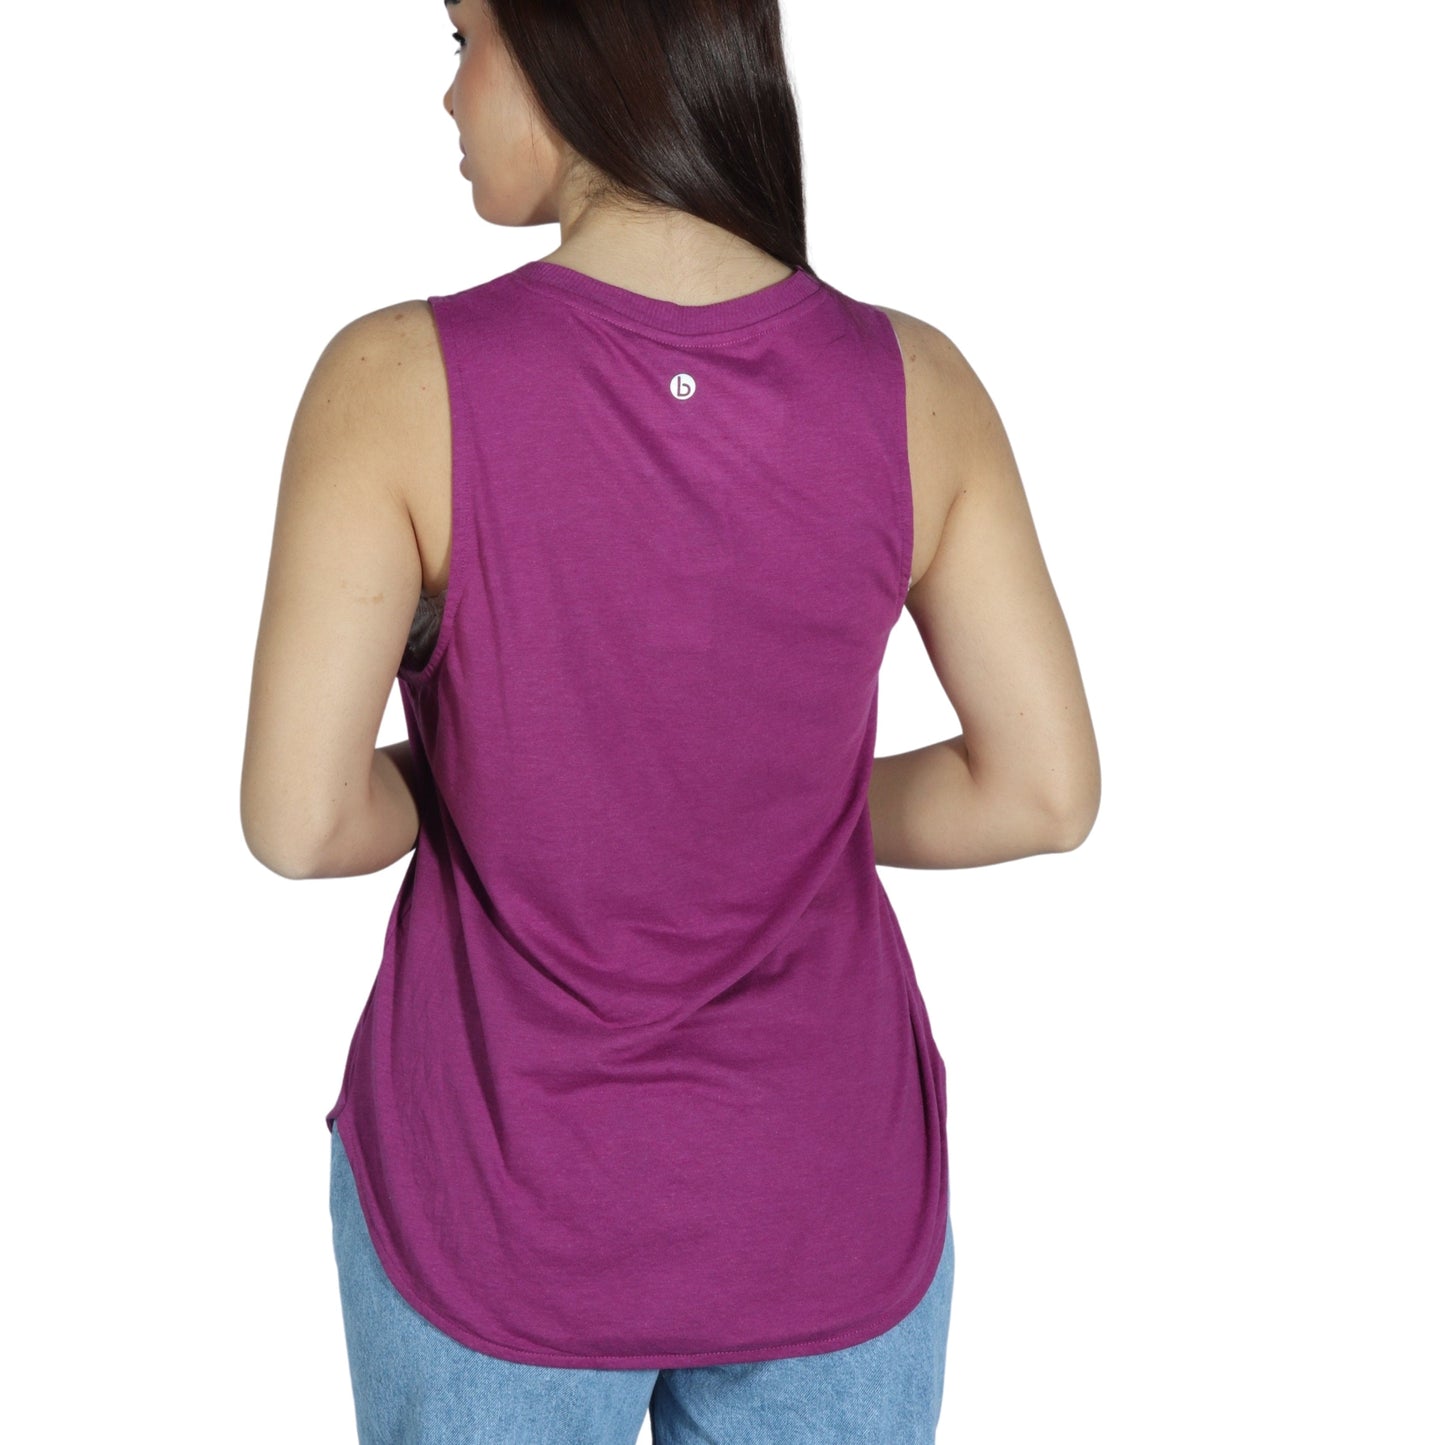 COTTON ON Womens sports M / Purple COTTON ON - Side Vents Tan Top